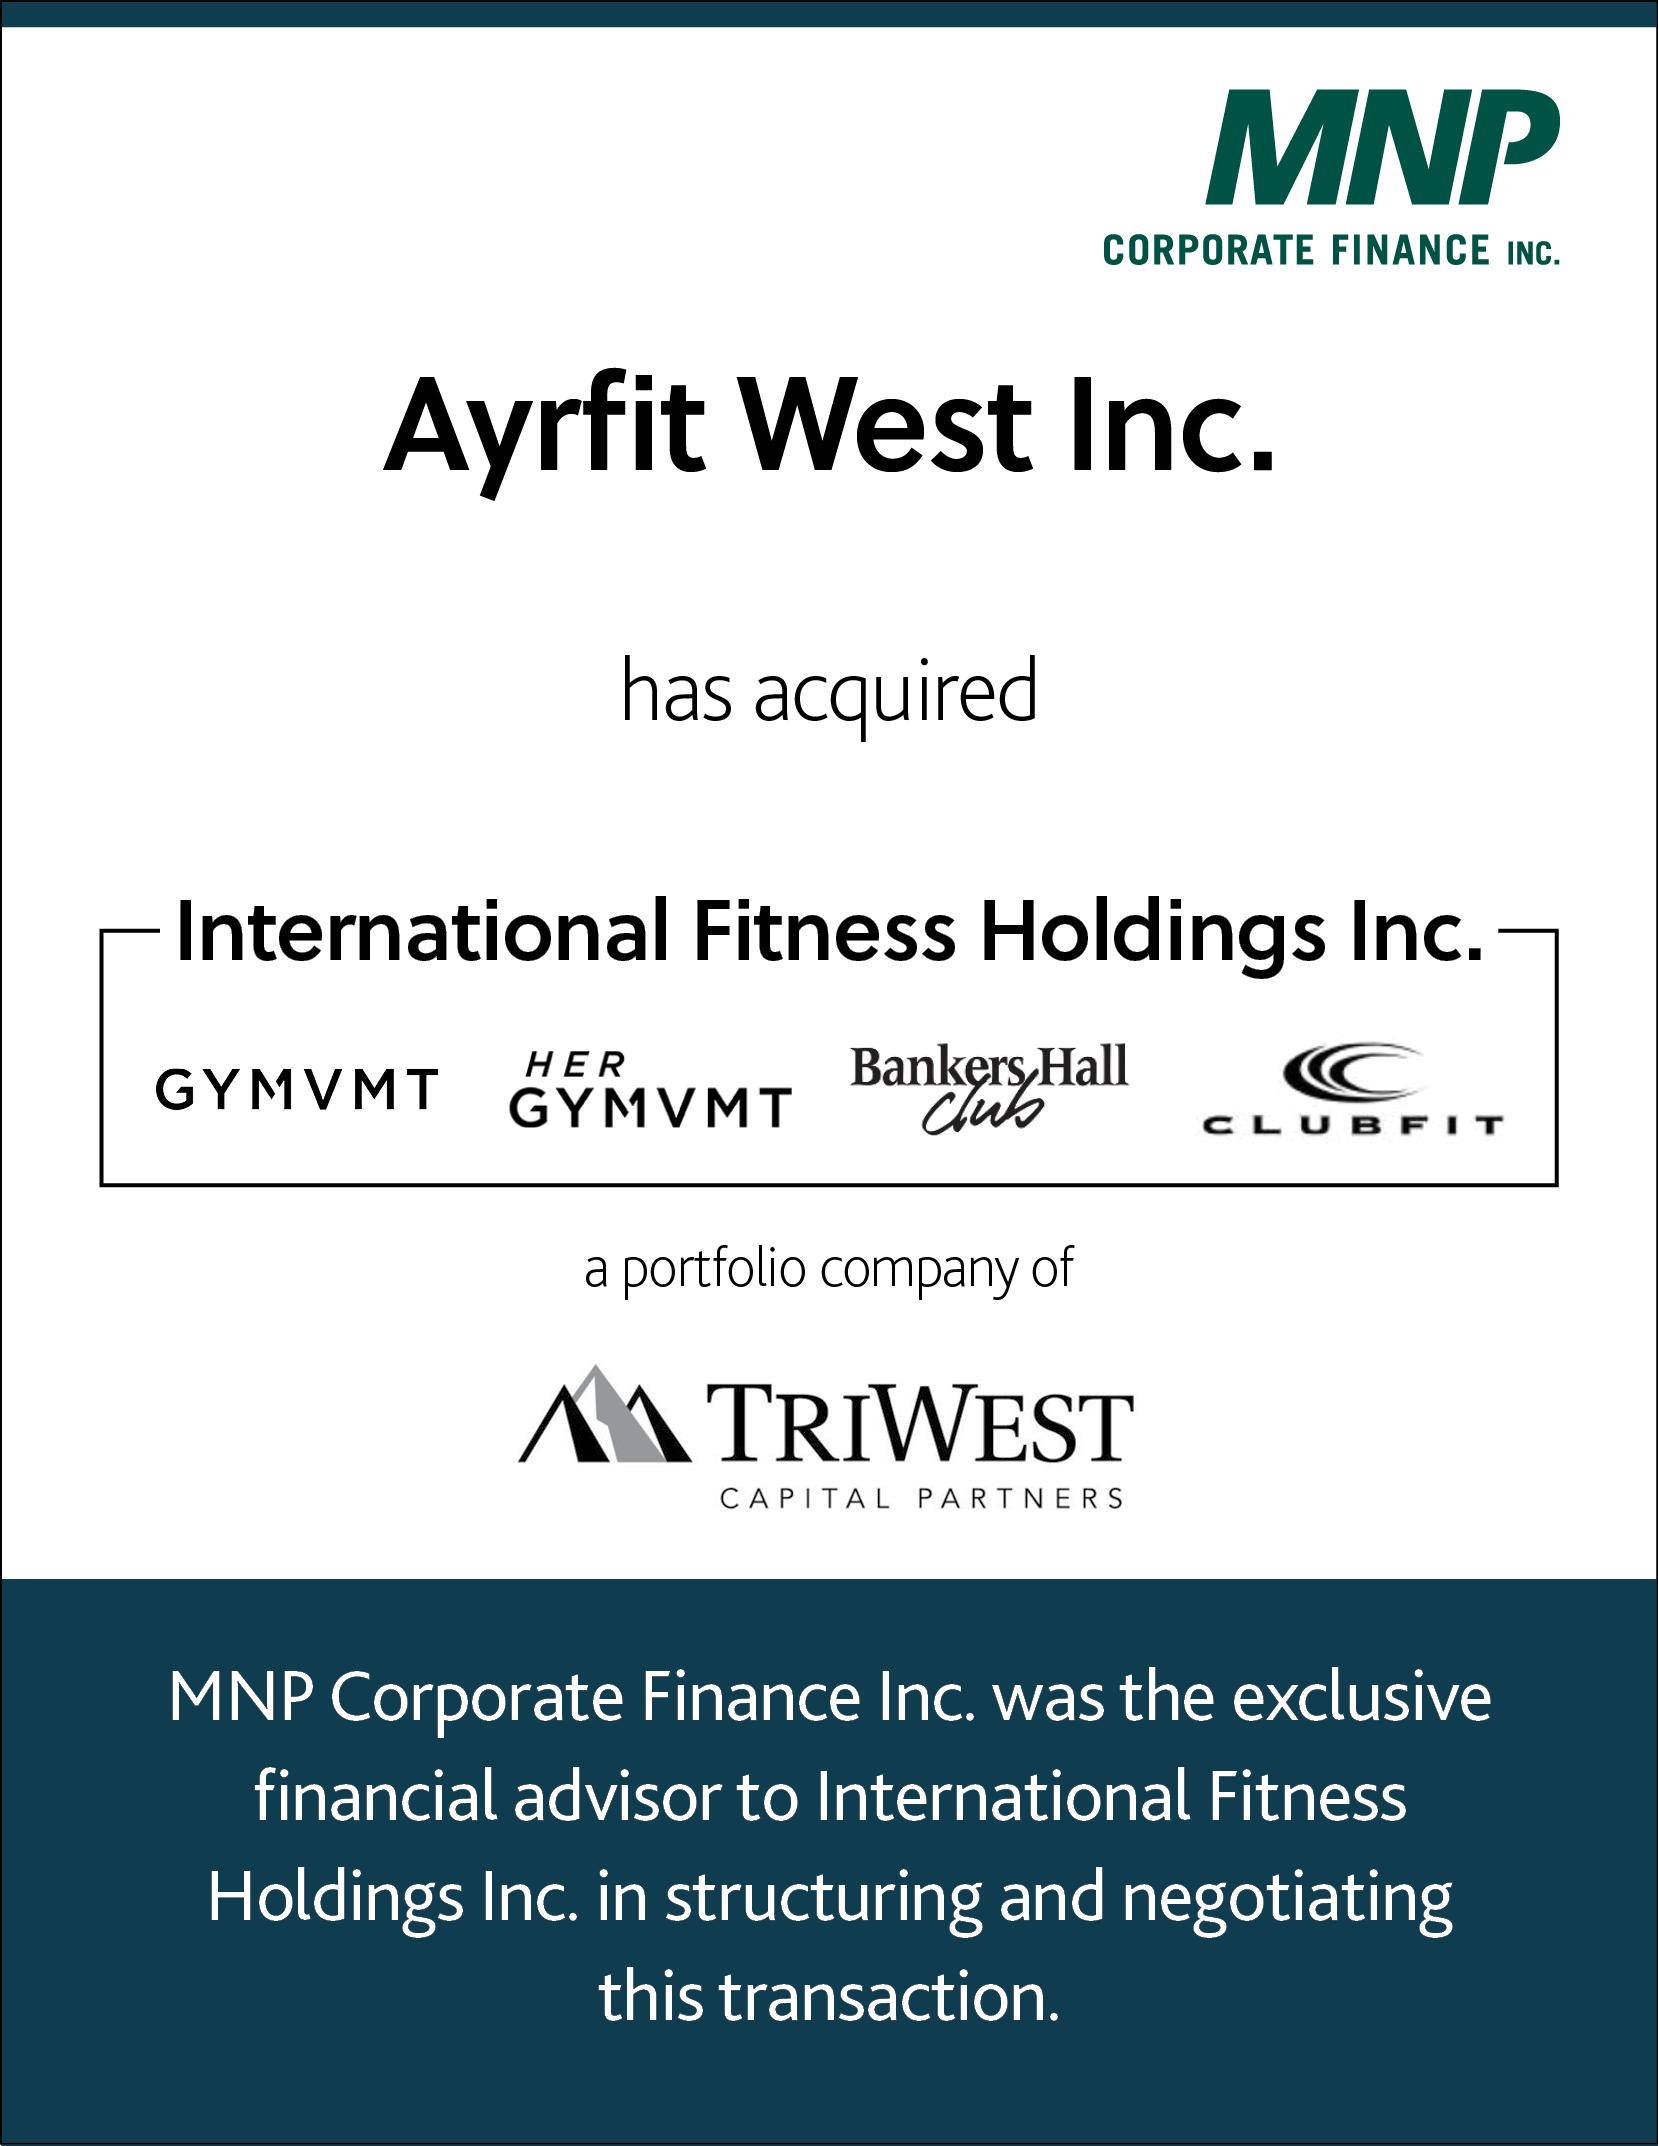 Ayrfit West Inc. has acquired International Fitness Holdings Inc., a portfolio company of TriWest Capital Partners